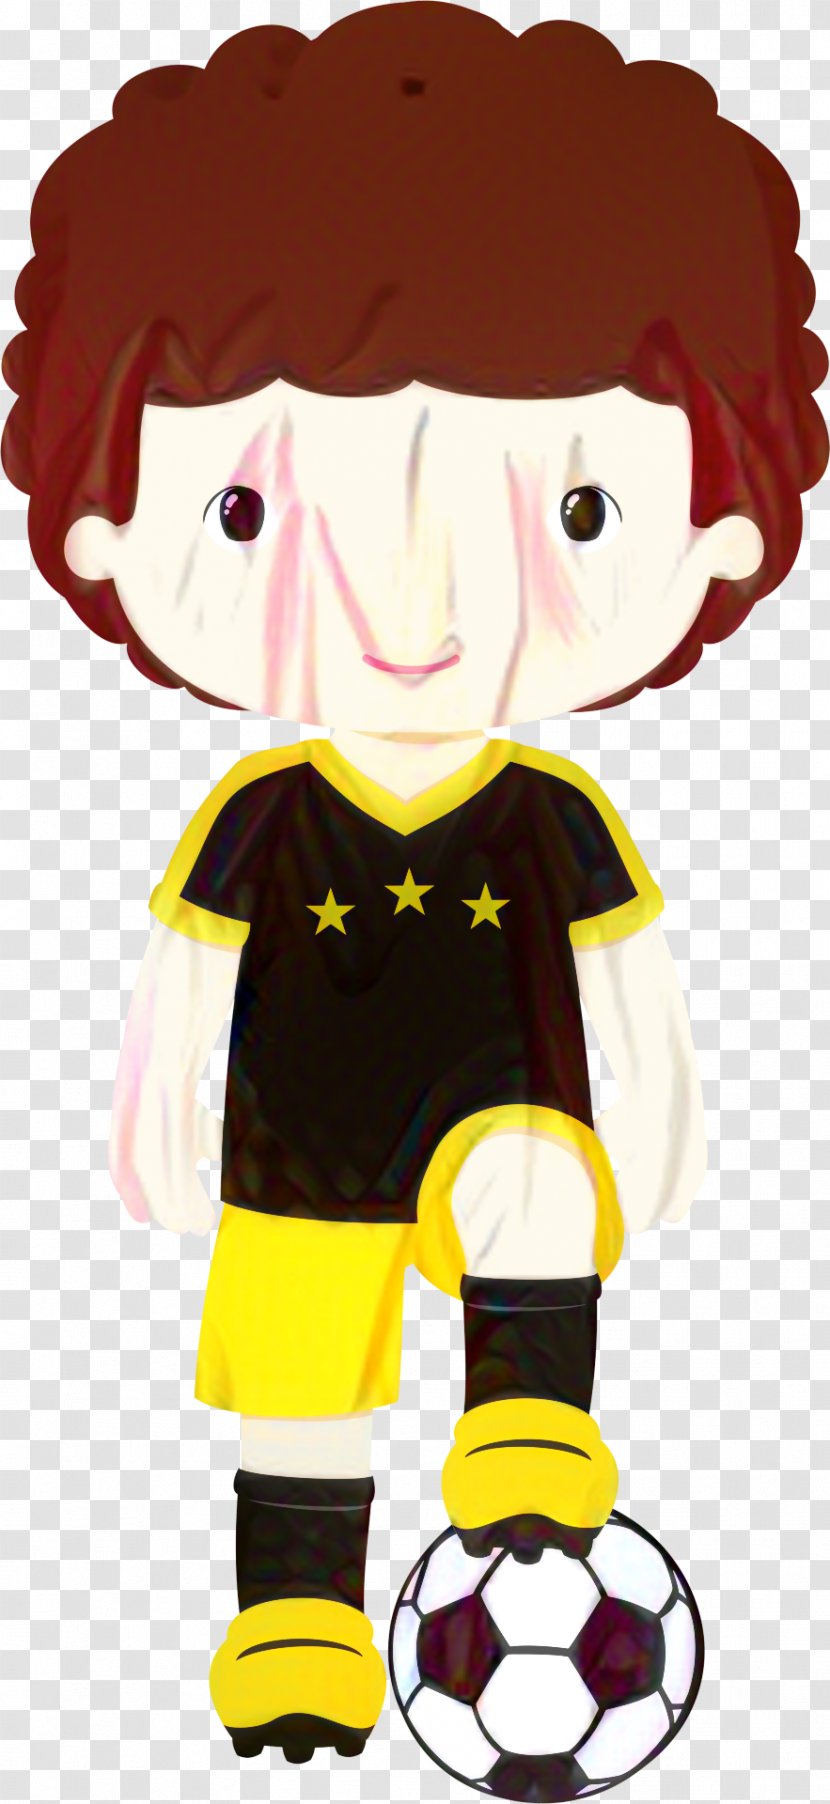 Volleyball Cartoon - Animation - Style Transparent PNG